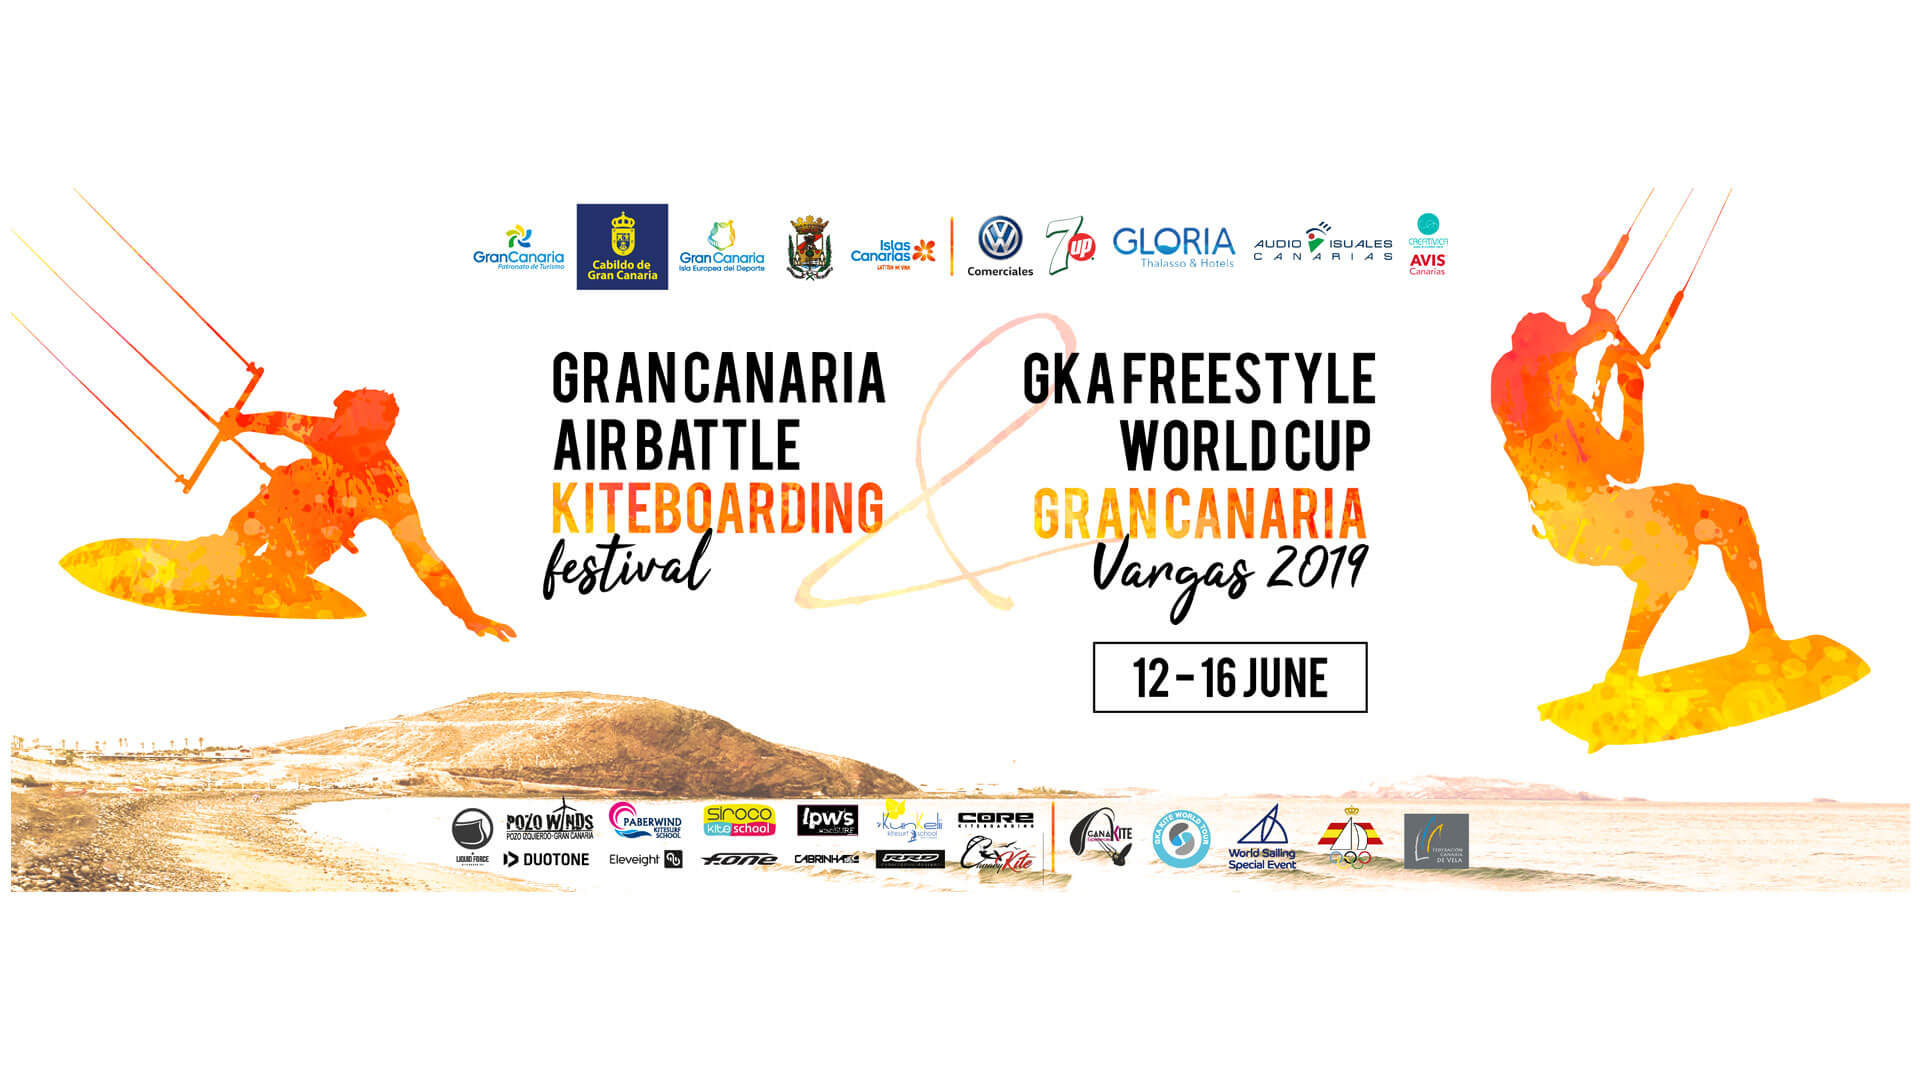 Image for GKA Freestyle World Cup Gran Canaria 2019